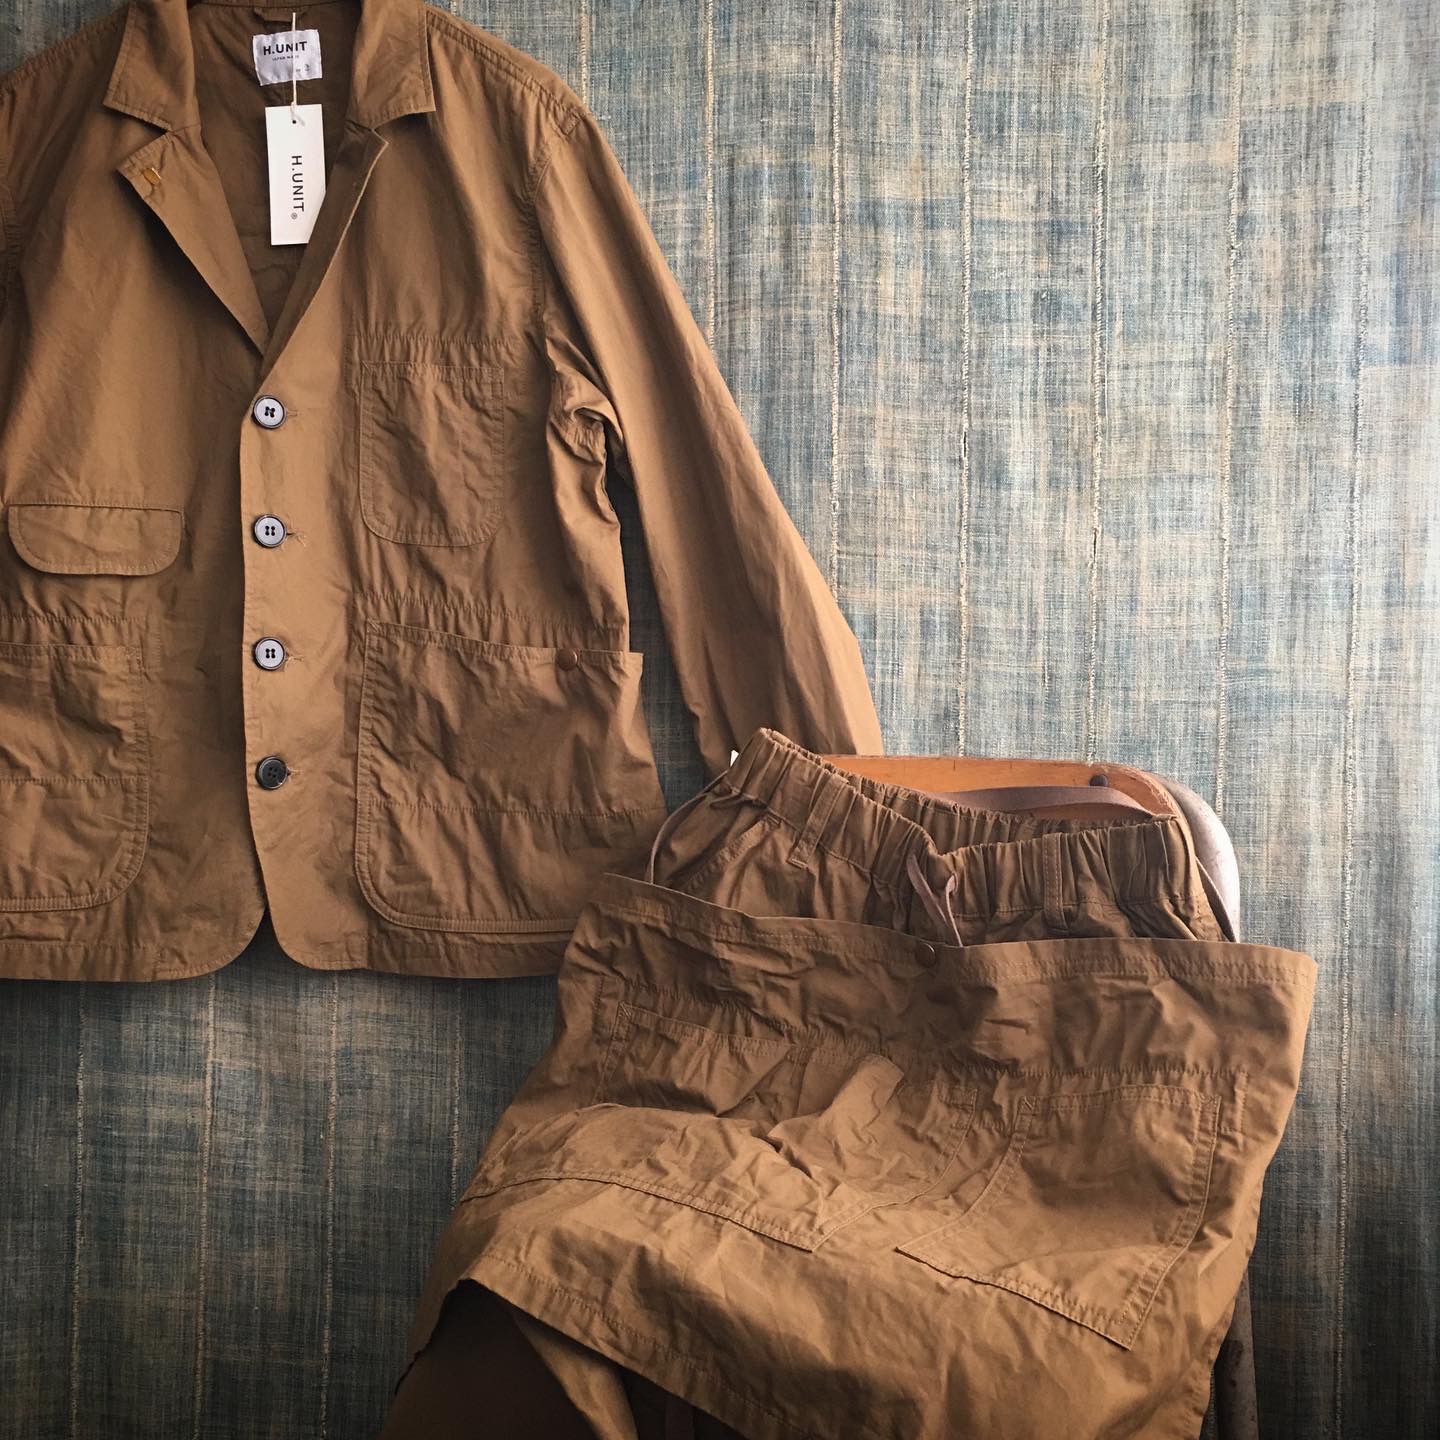 Read more about the article 【H.UNIT】weather cloth coverall & apron pant.